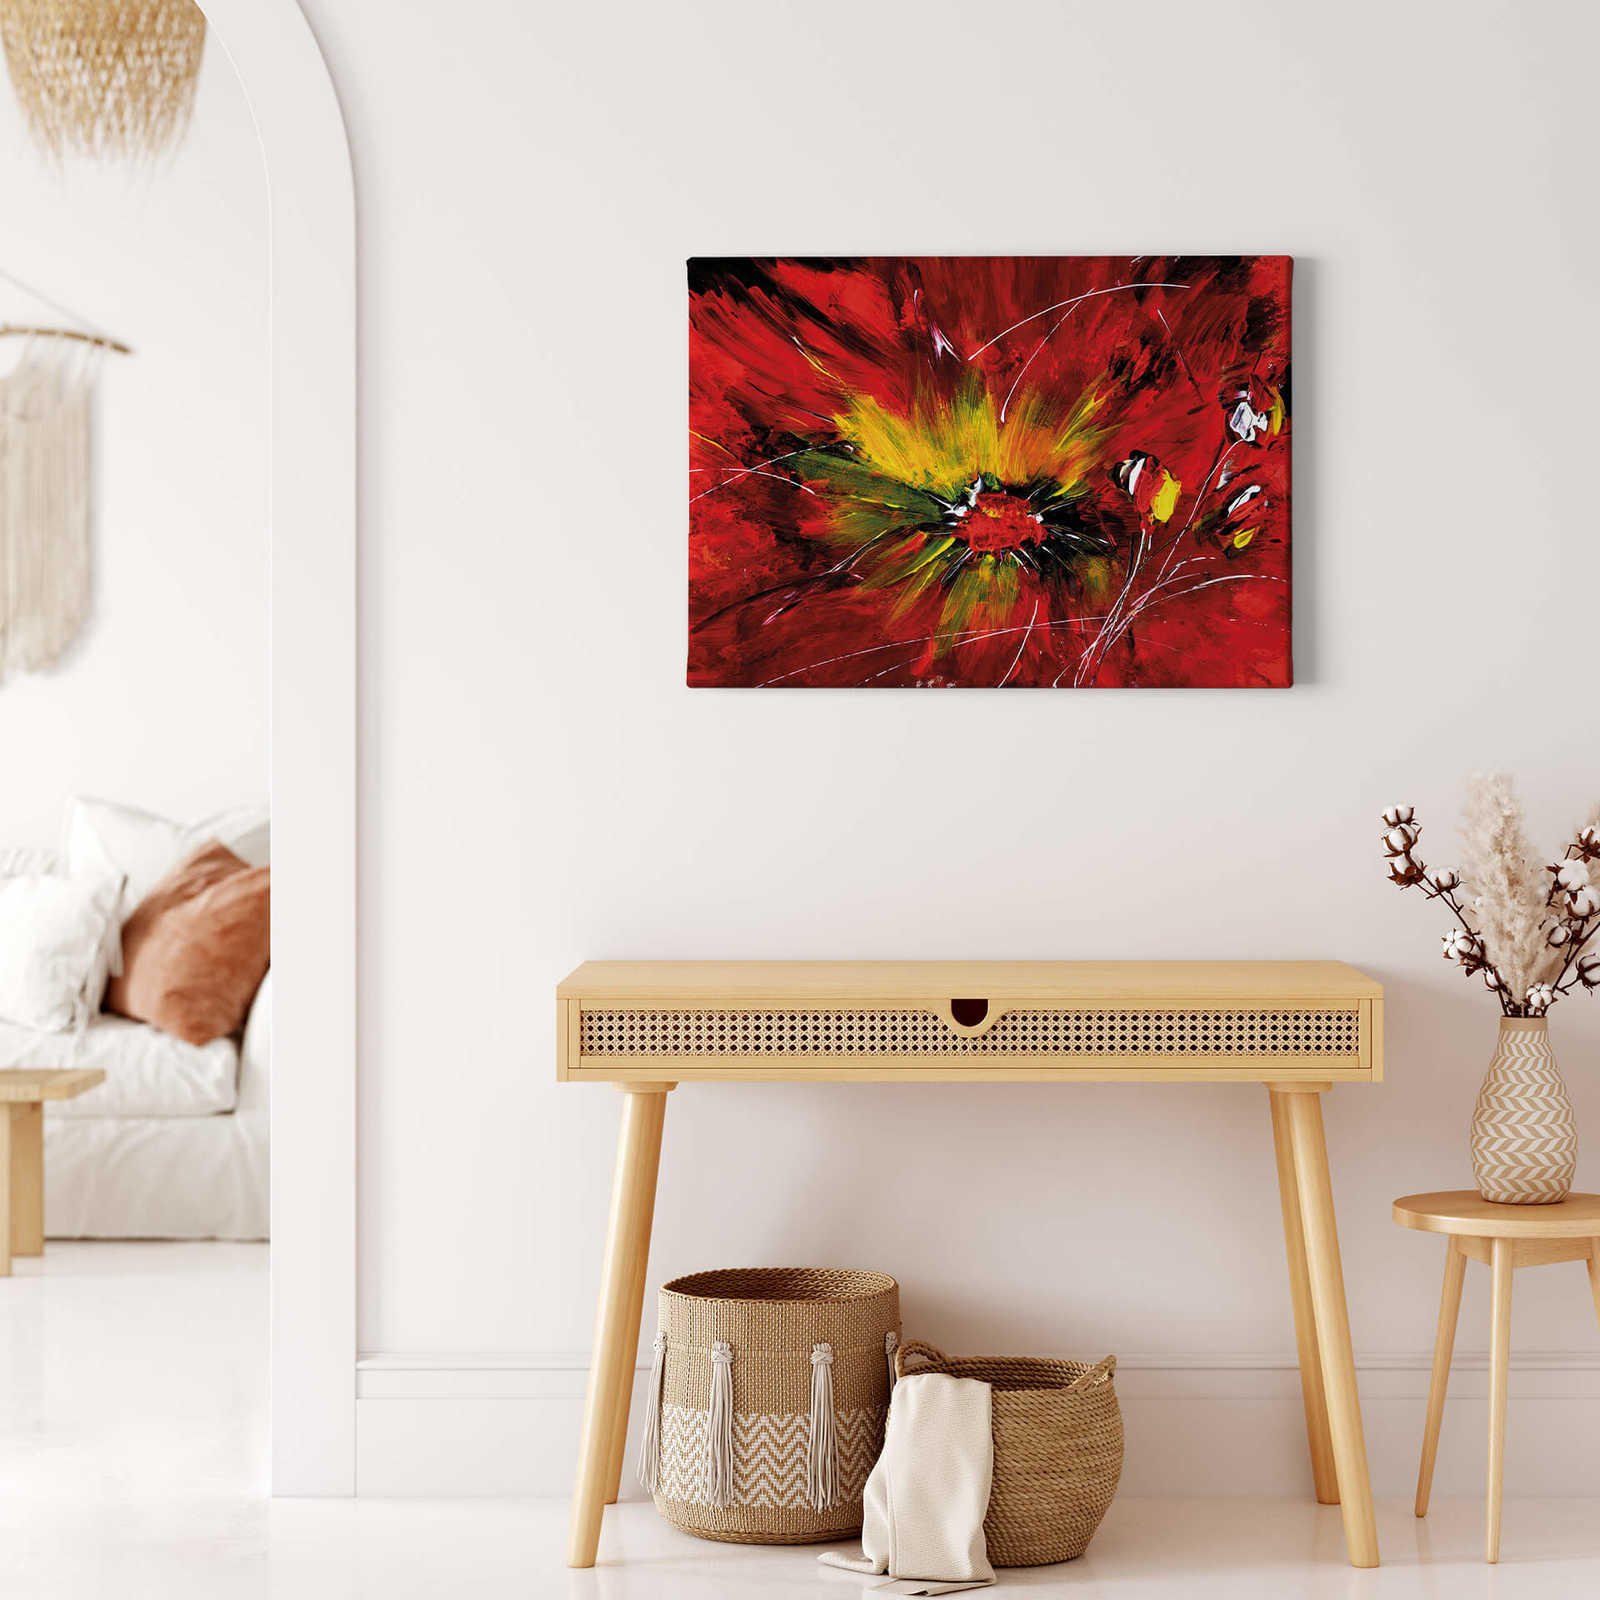             Art canvas print abstract and modern by Niksic
        